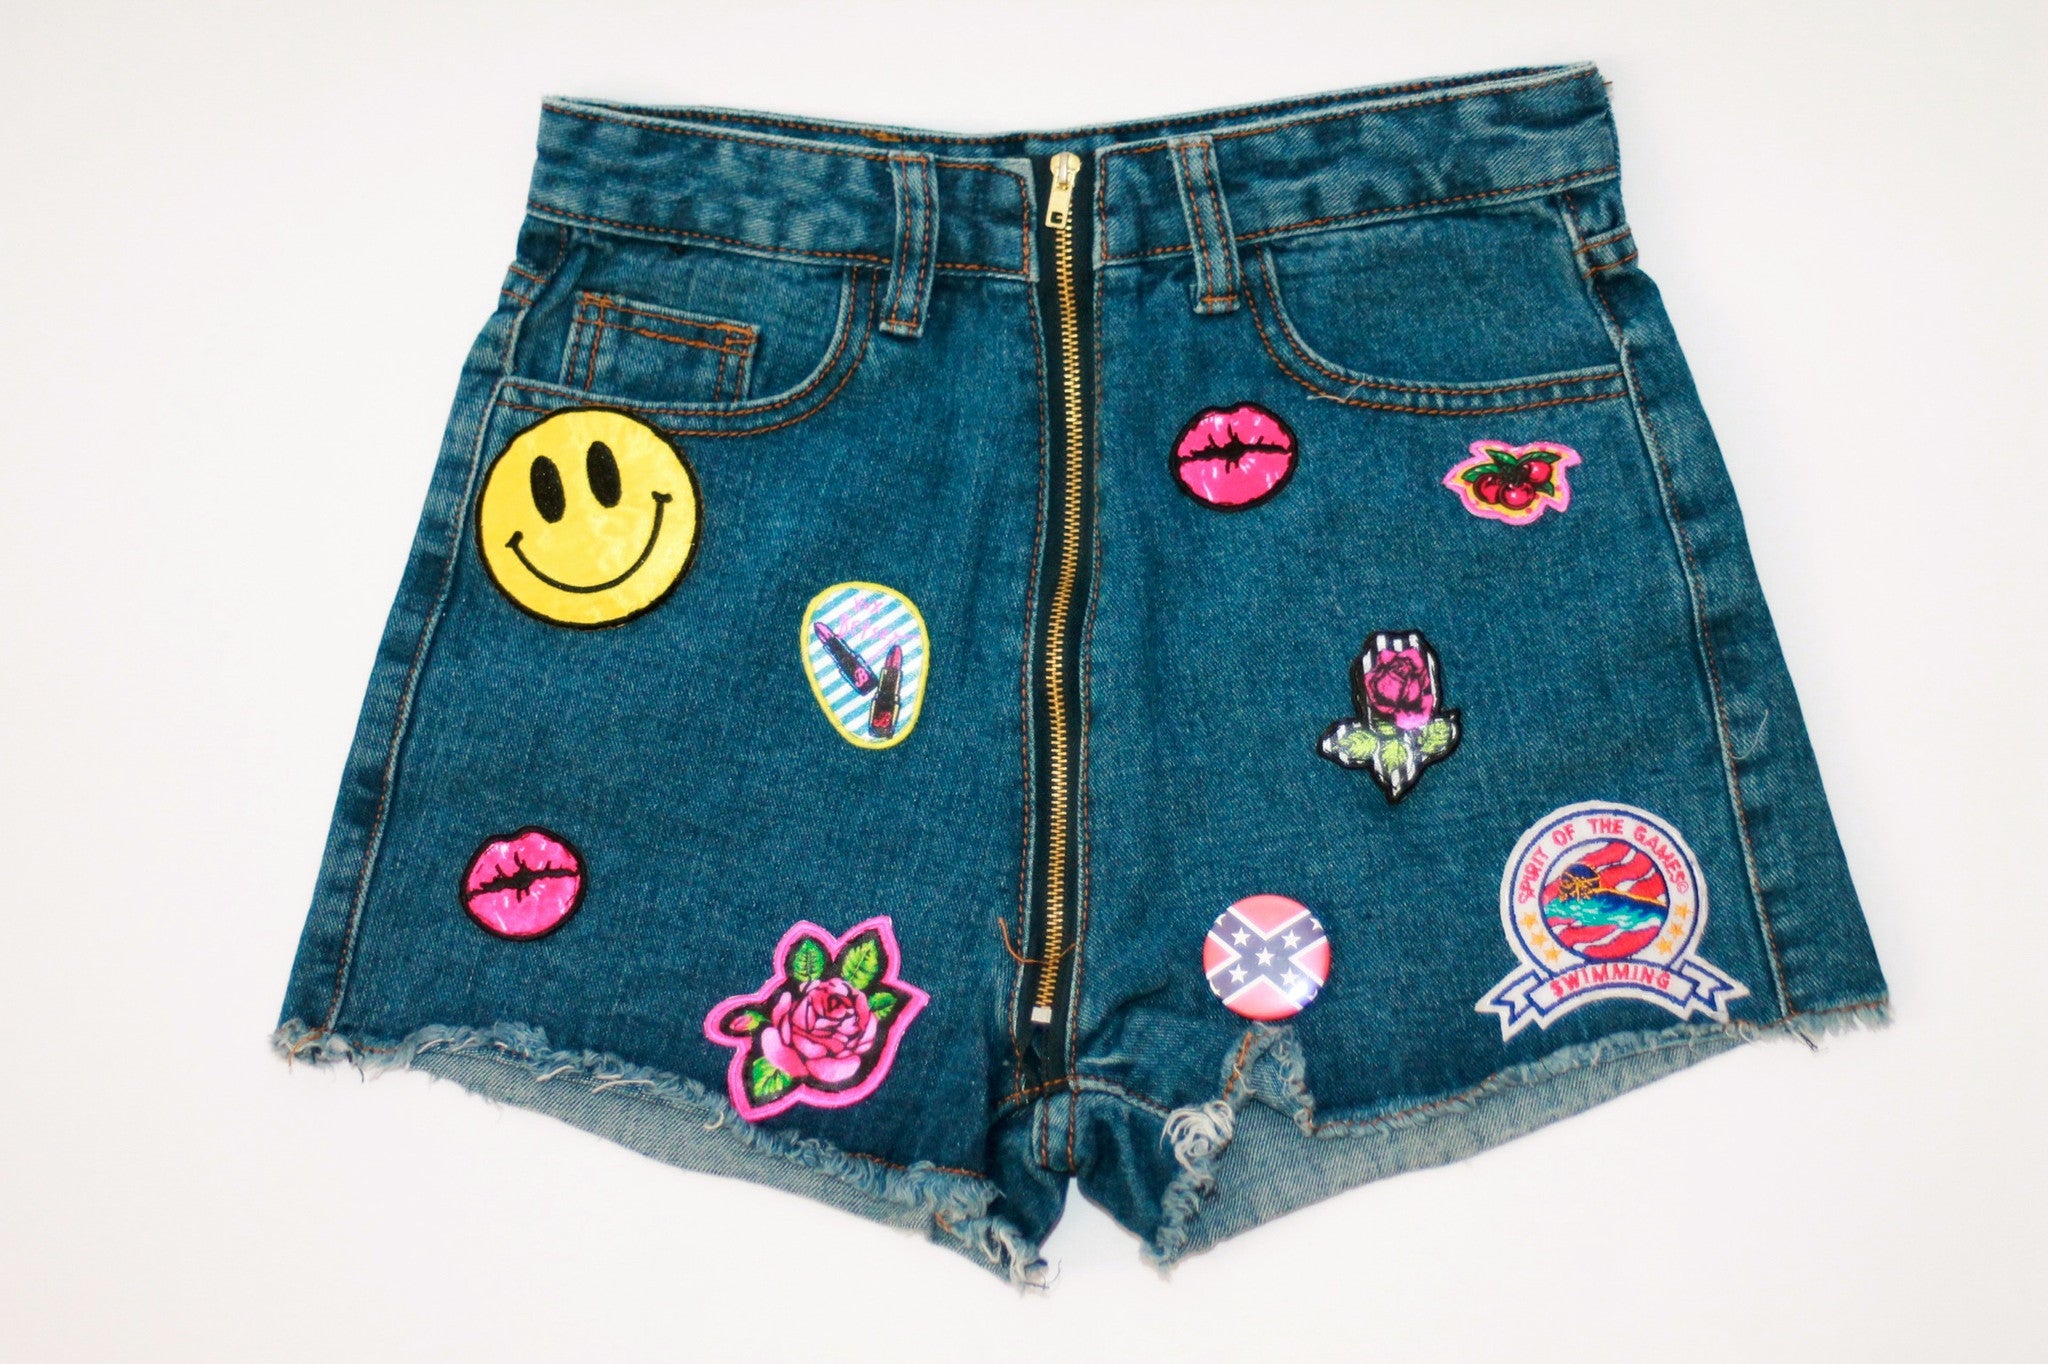 Custom 7ven x Betsey Johnson Patched Shorts #3